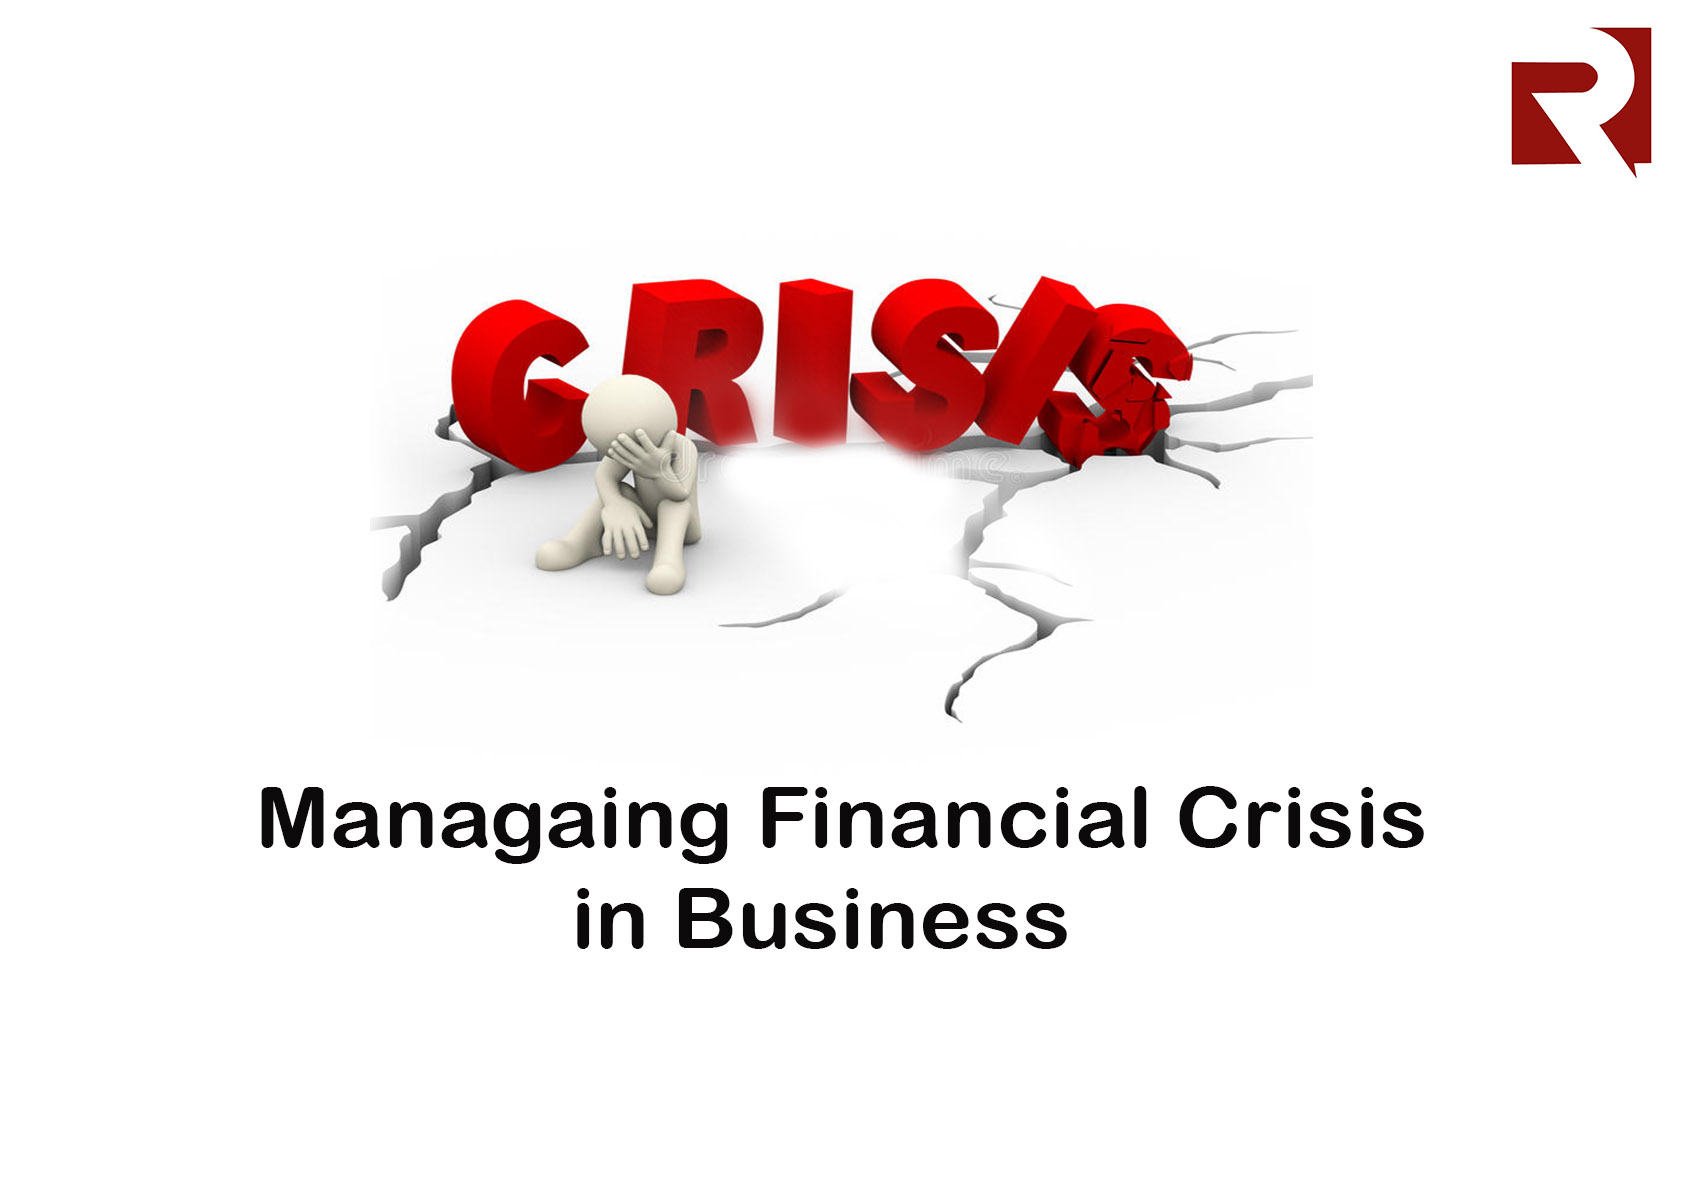 Managing a Financial Crisis in Business